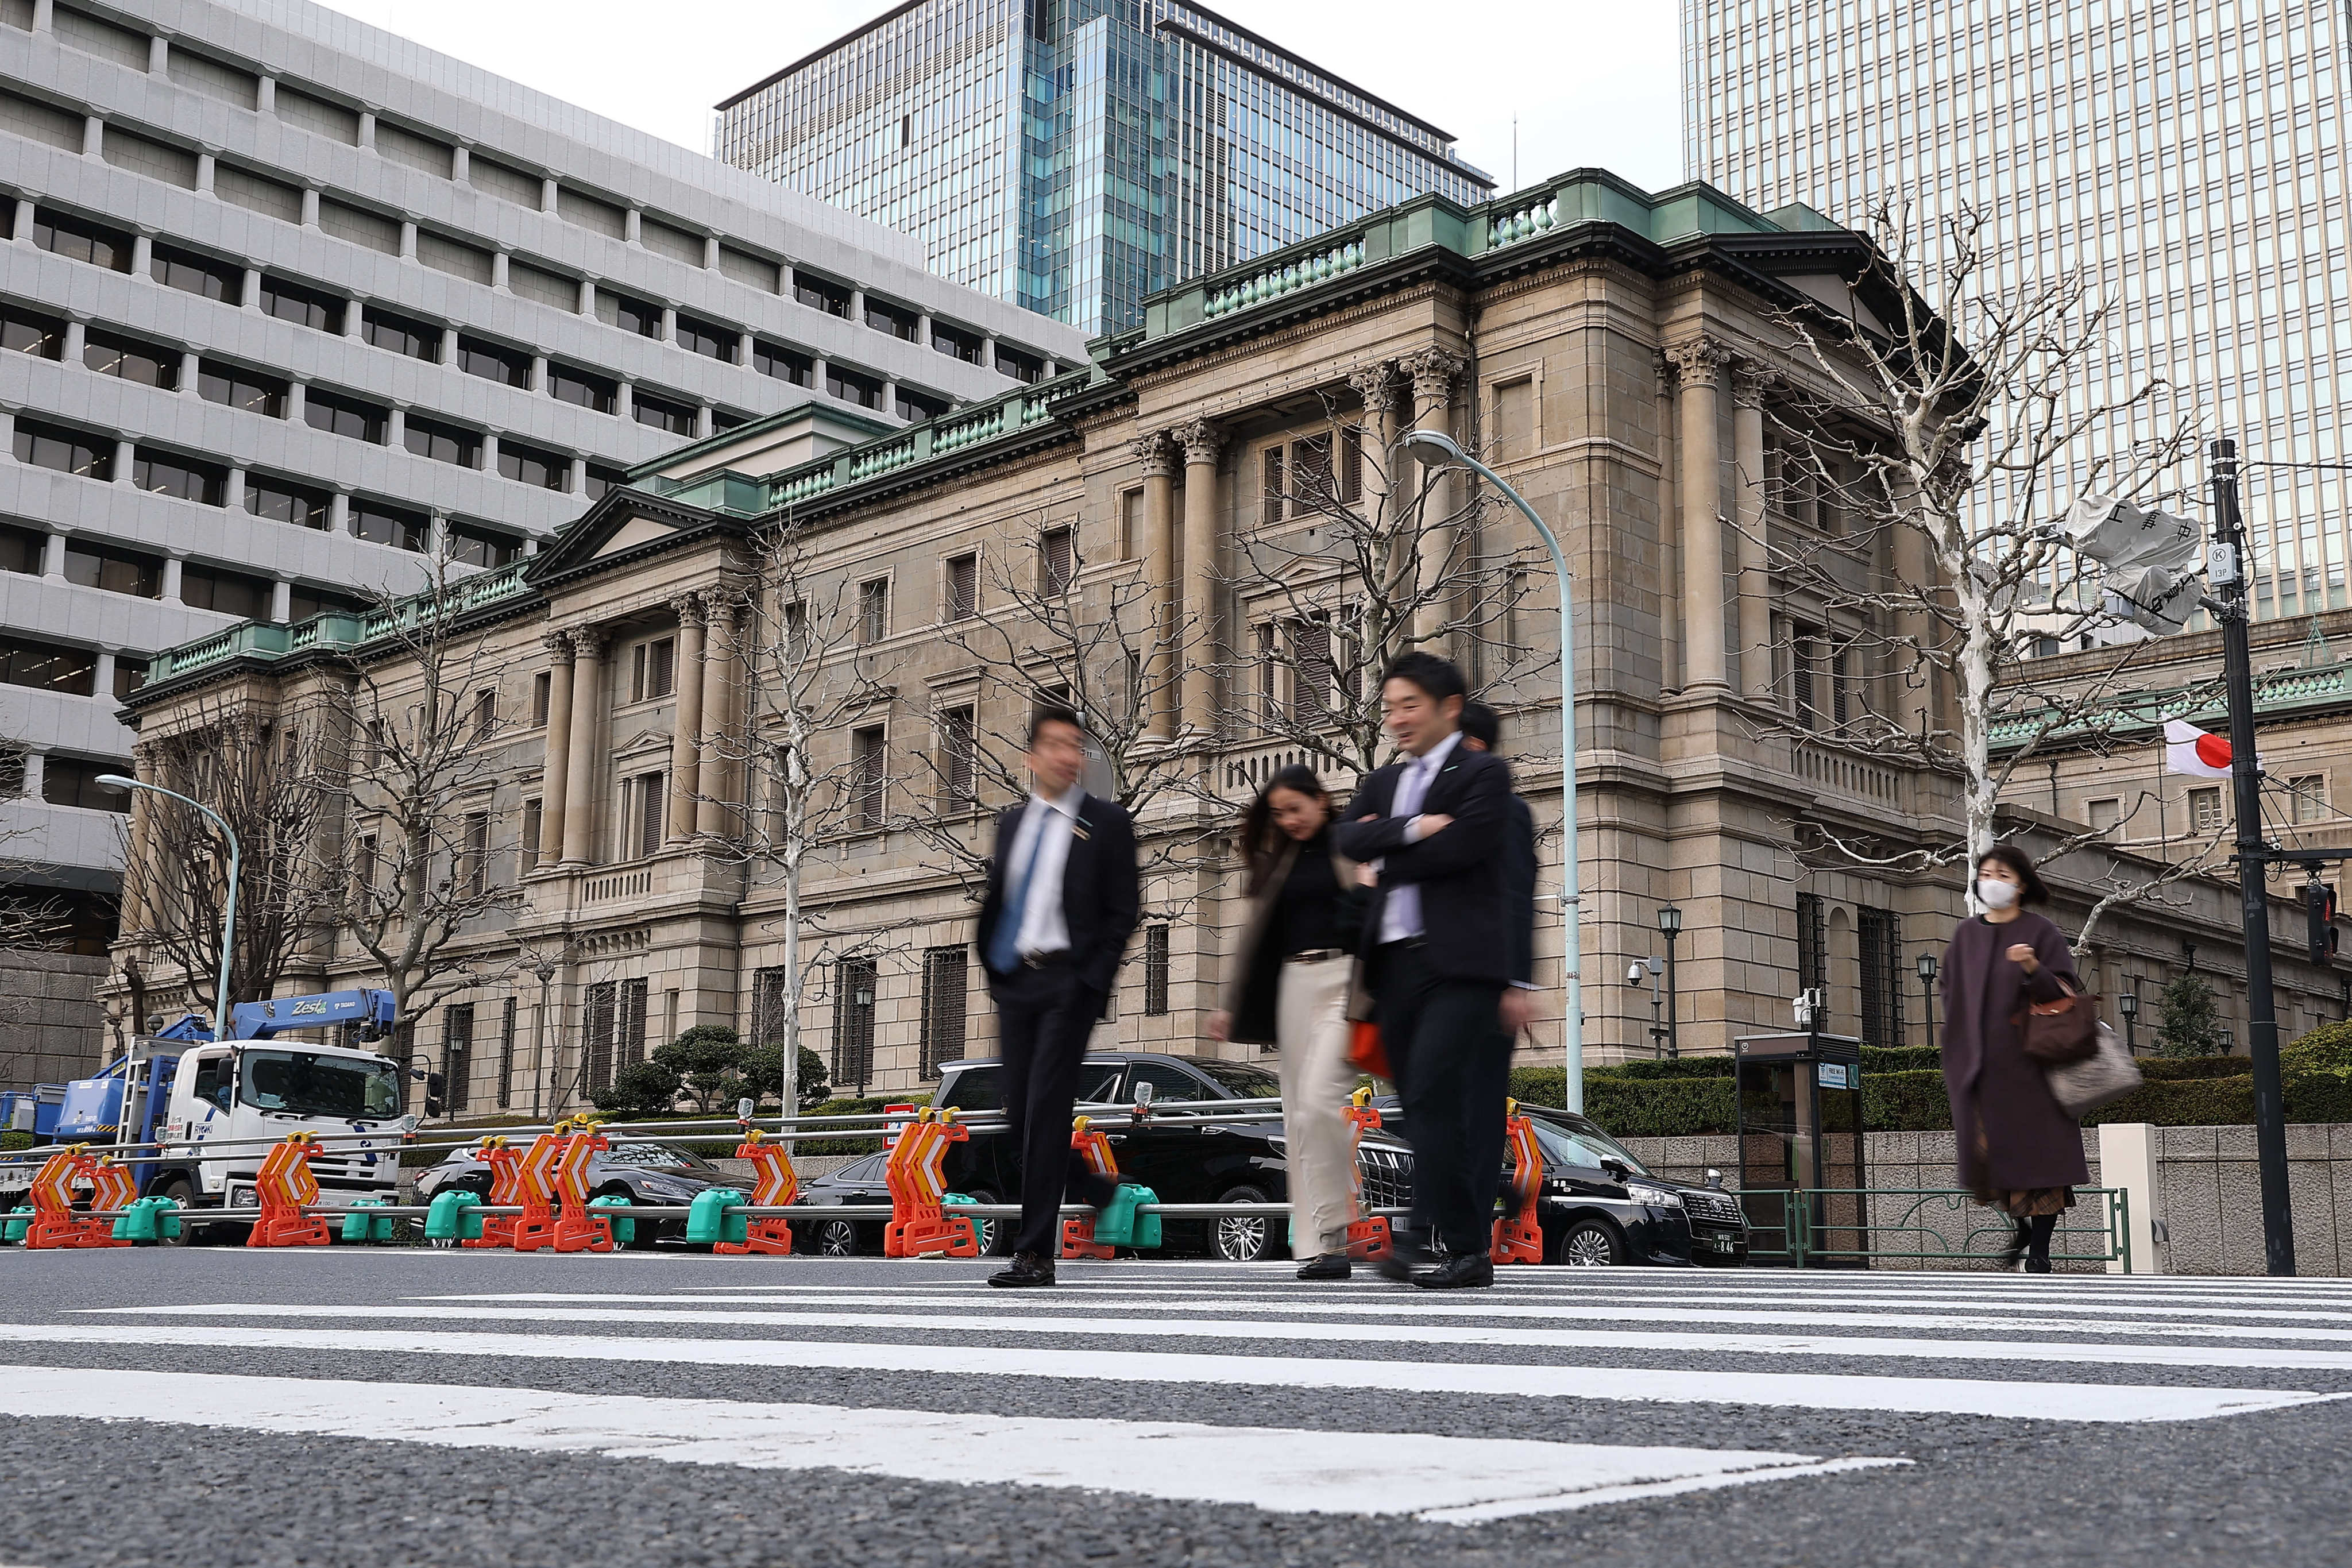 Pedestrians walk past the Bank of Japan headquarters in downtown Tokyo on March 19. Japan’s central bank has raised its key interest rate for the first time in 17 years, ending a long-standing policy of negative interest rates to stimulate the economy. Photo: dpa